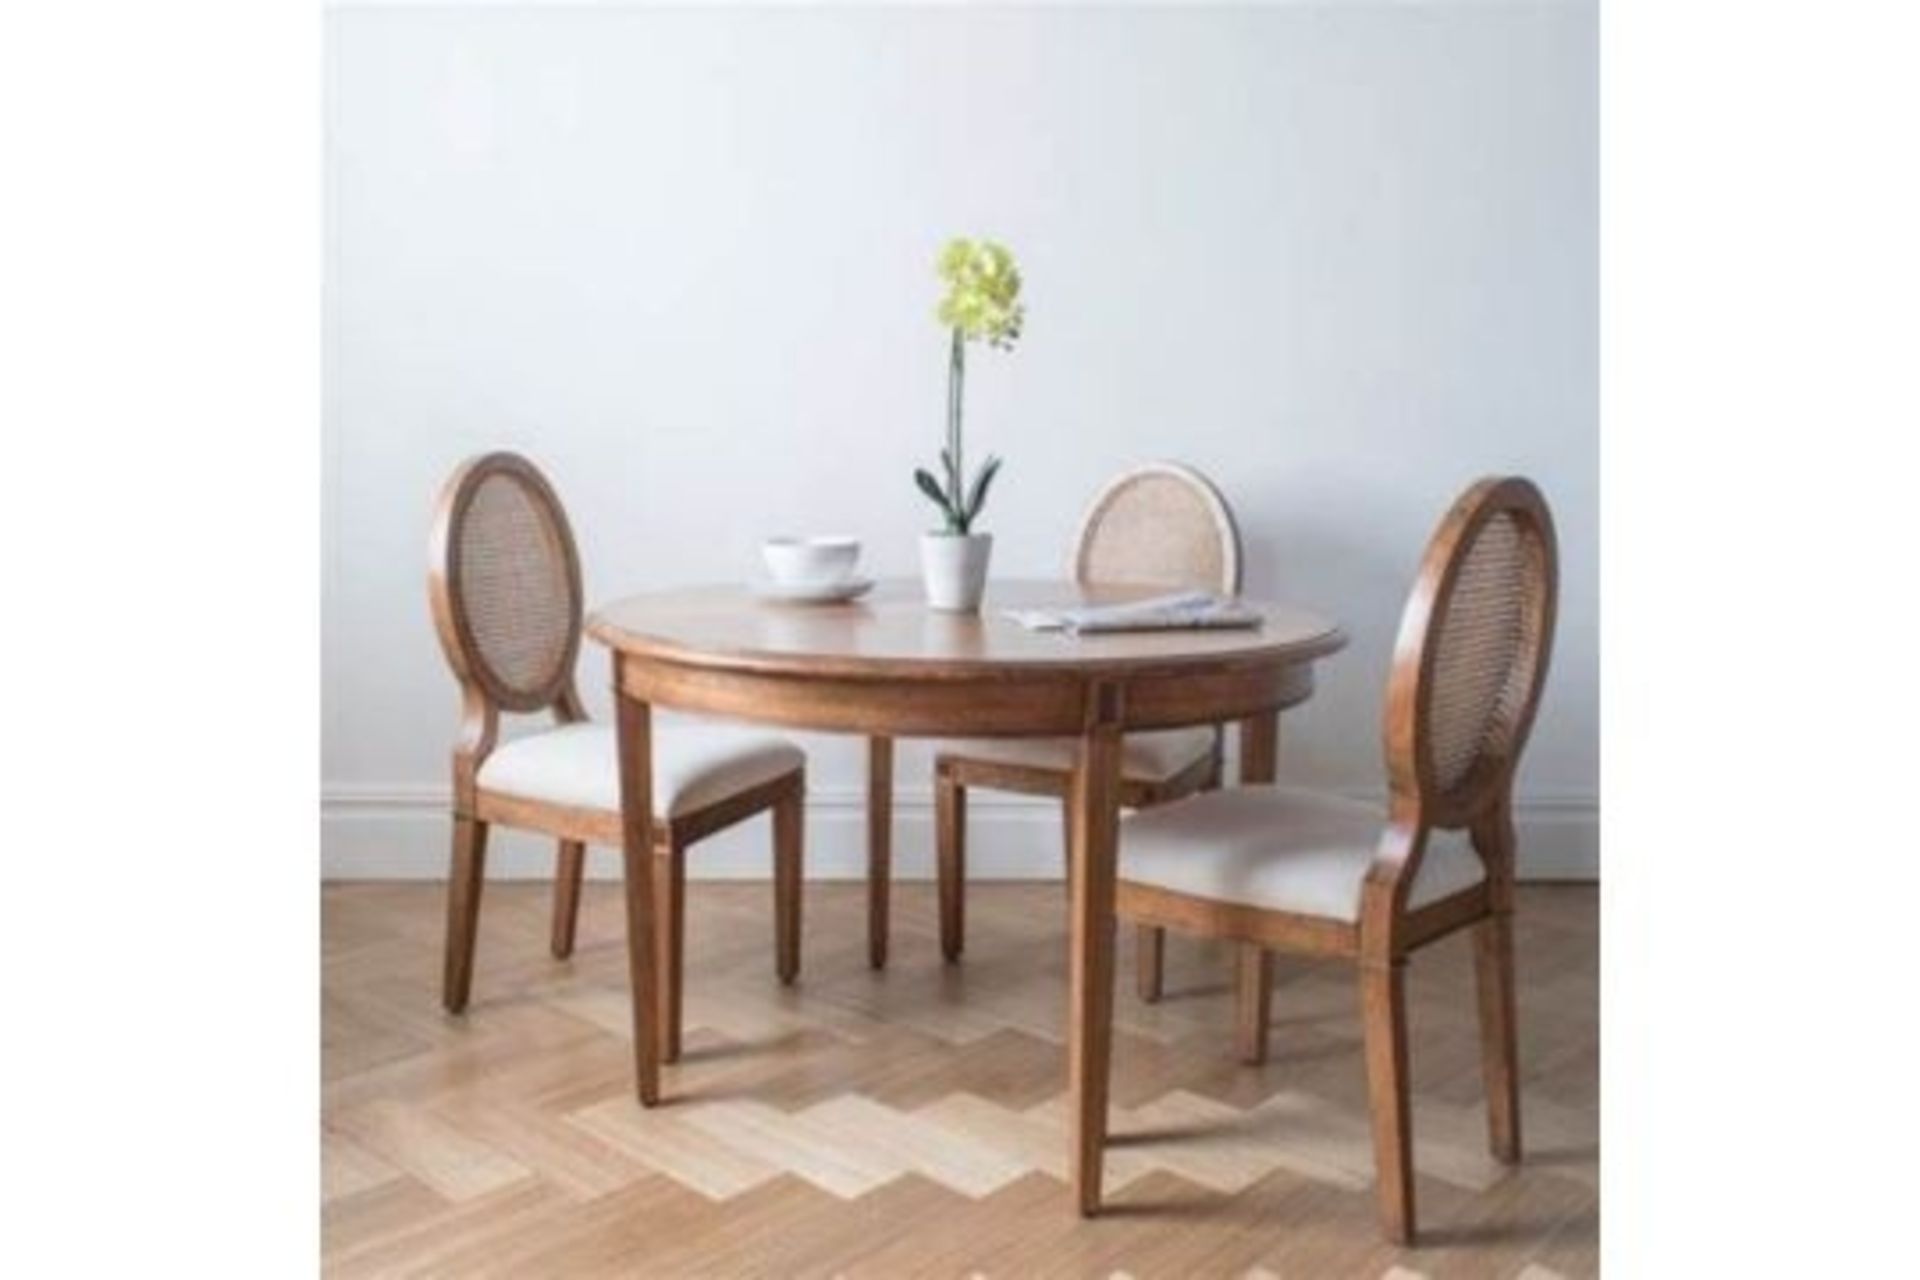 Bellevue Circular Table The Bellevue Is A Stunning Dining And Occasional Collection, Made In An